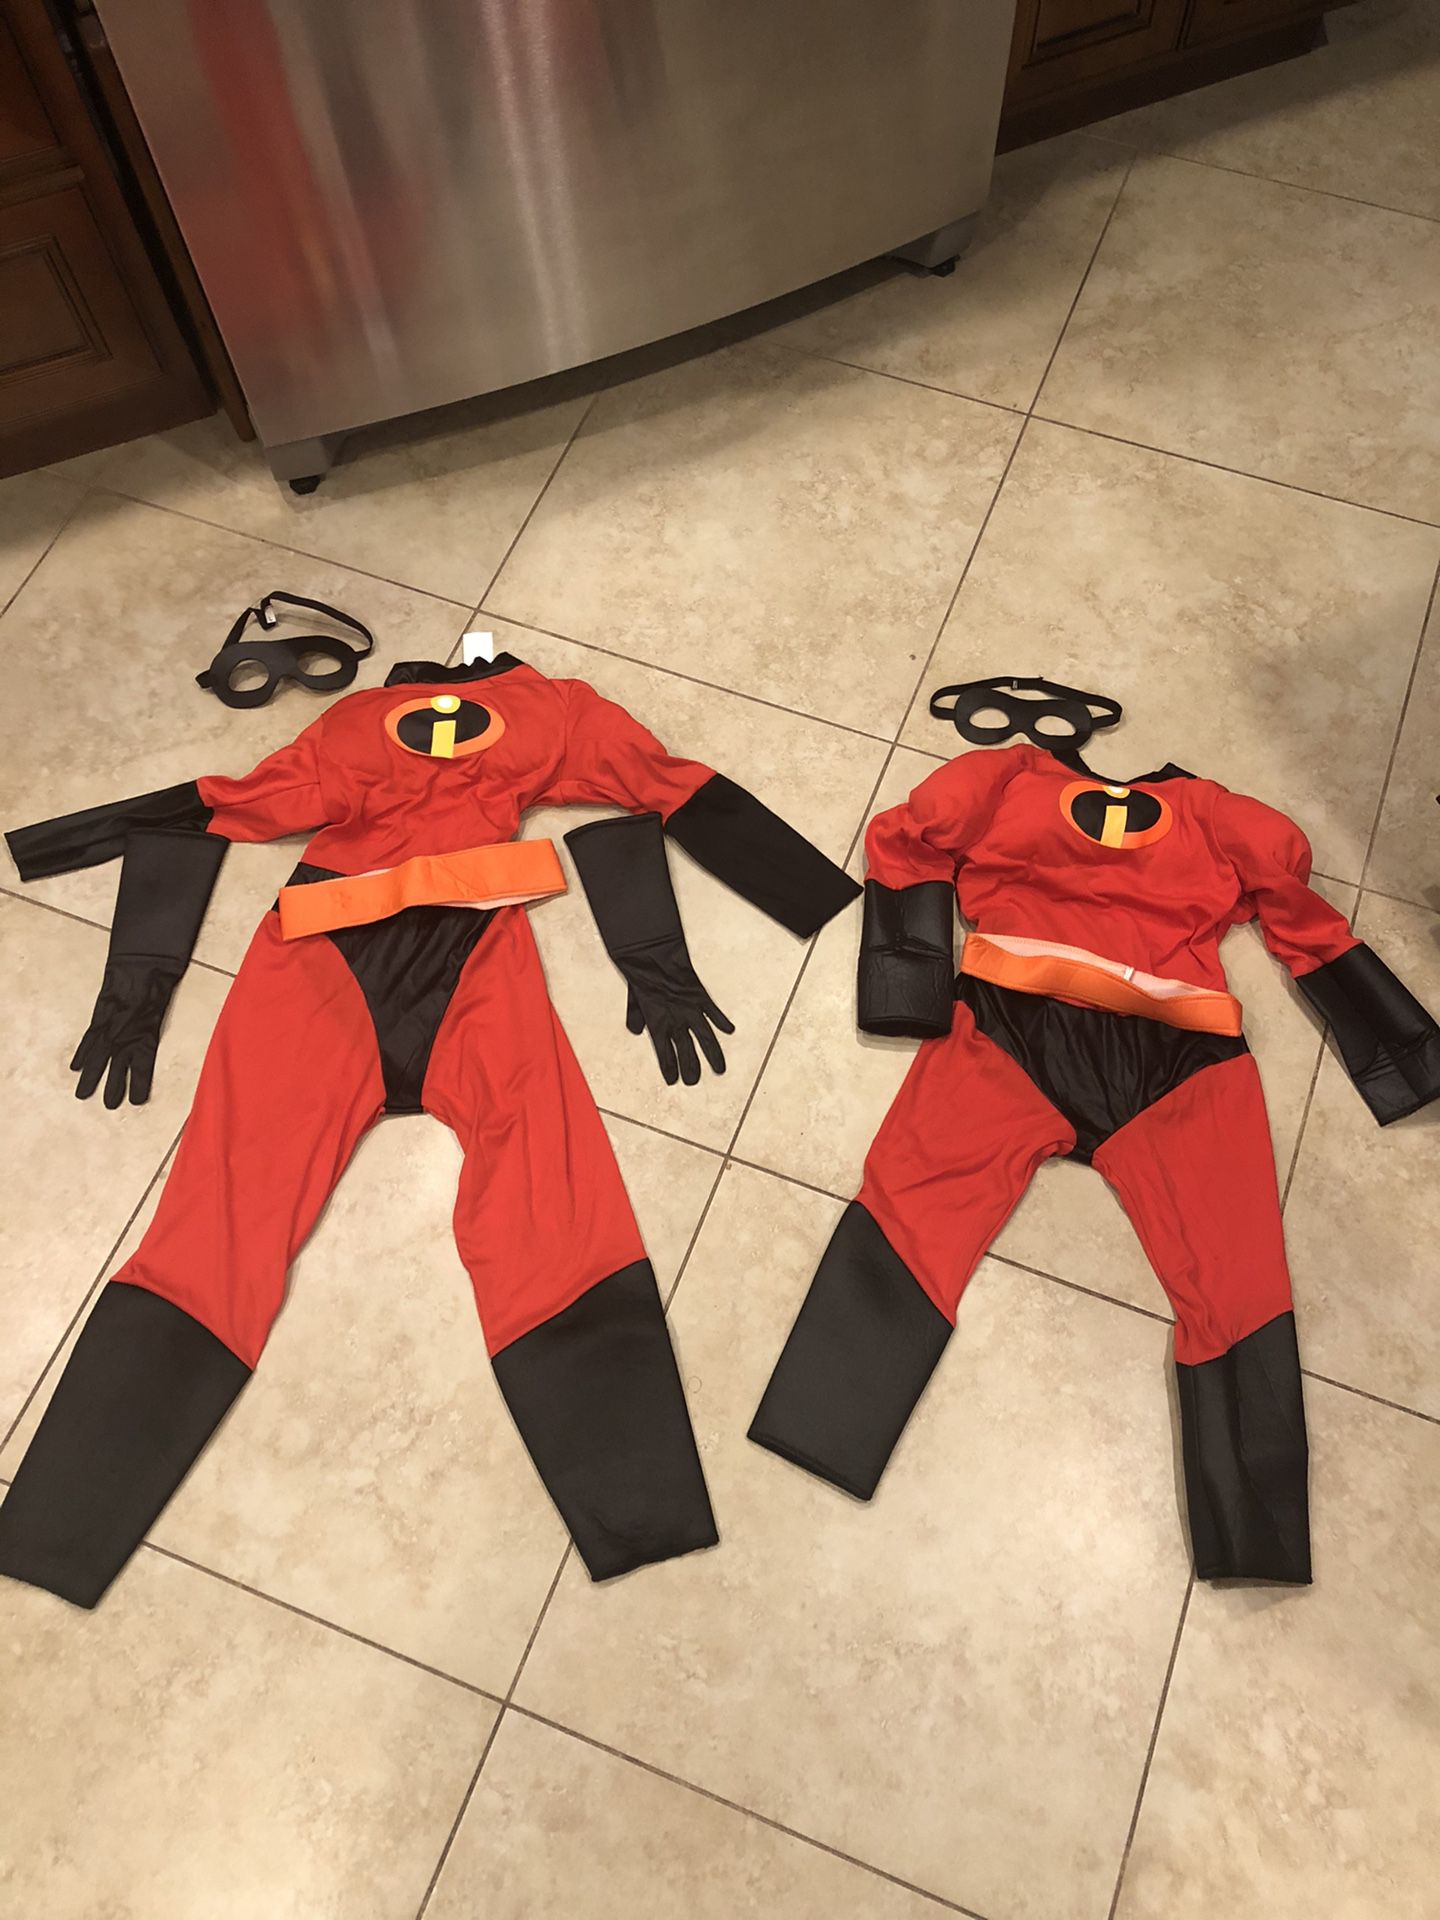 Incredibles Costumes - Dash 3T-4T and 4+